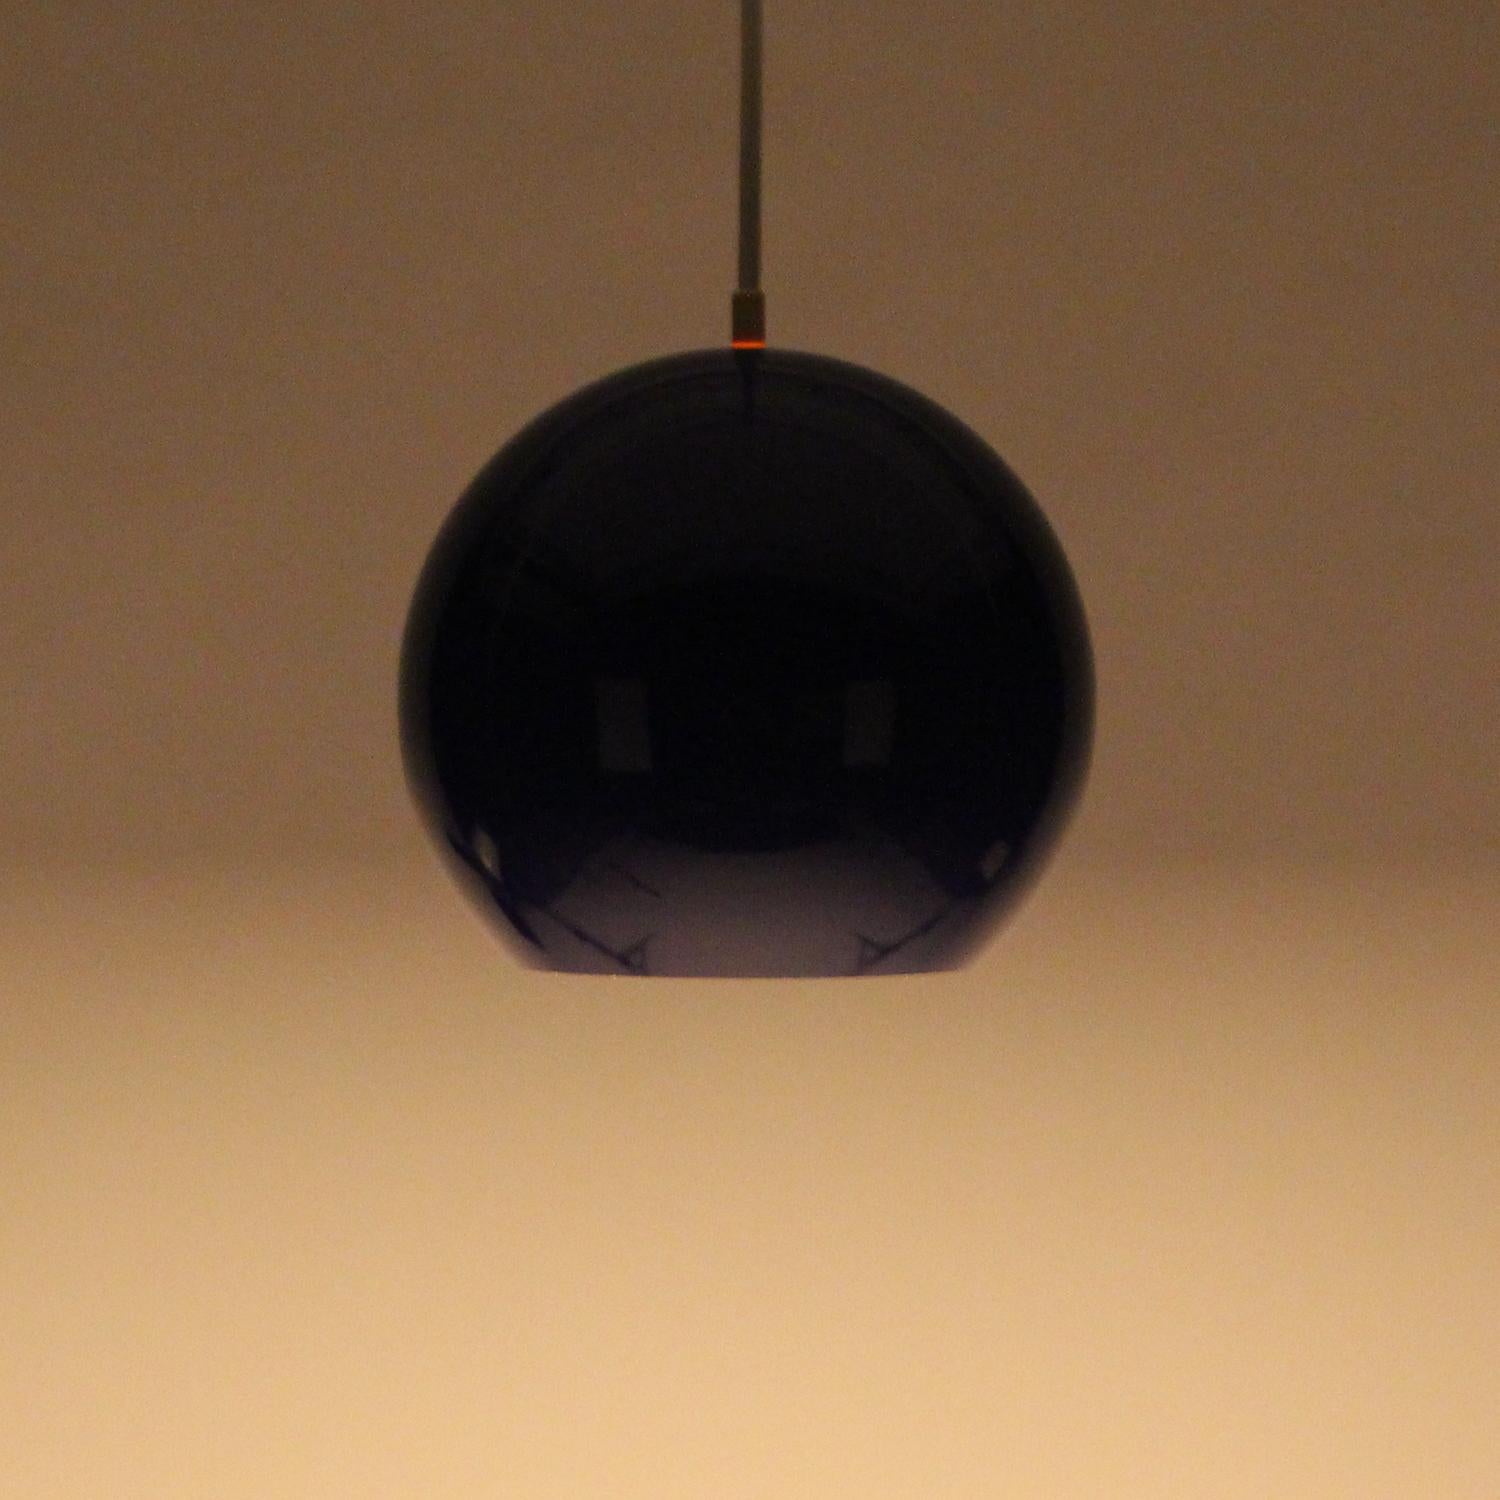 Topan, blue pendant by Verner Panton in 1967, produced by Louis Poulsen - beautiful blue ball shaped hanging lamp - vintage edition.

A charming blue metal pendant light, shaped like a ball with its bottom cut off. This, combined with its white